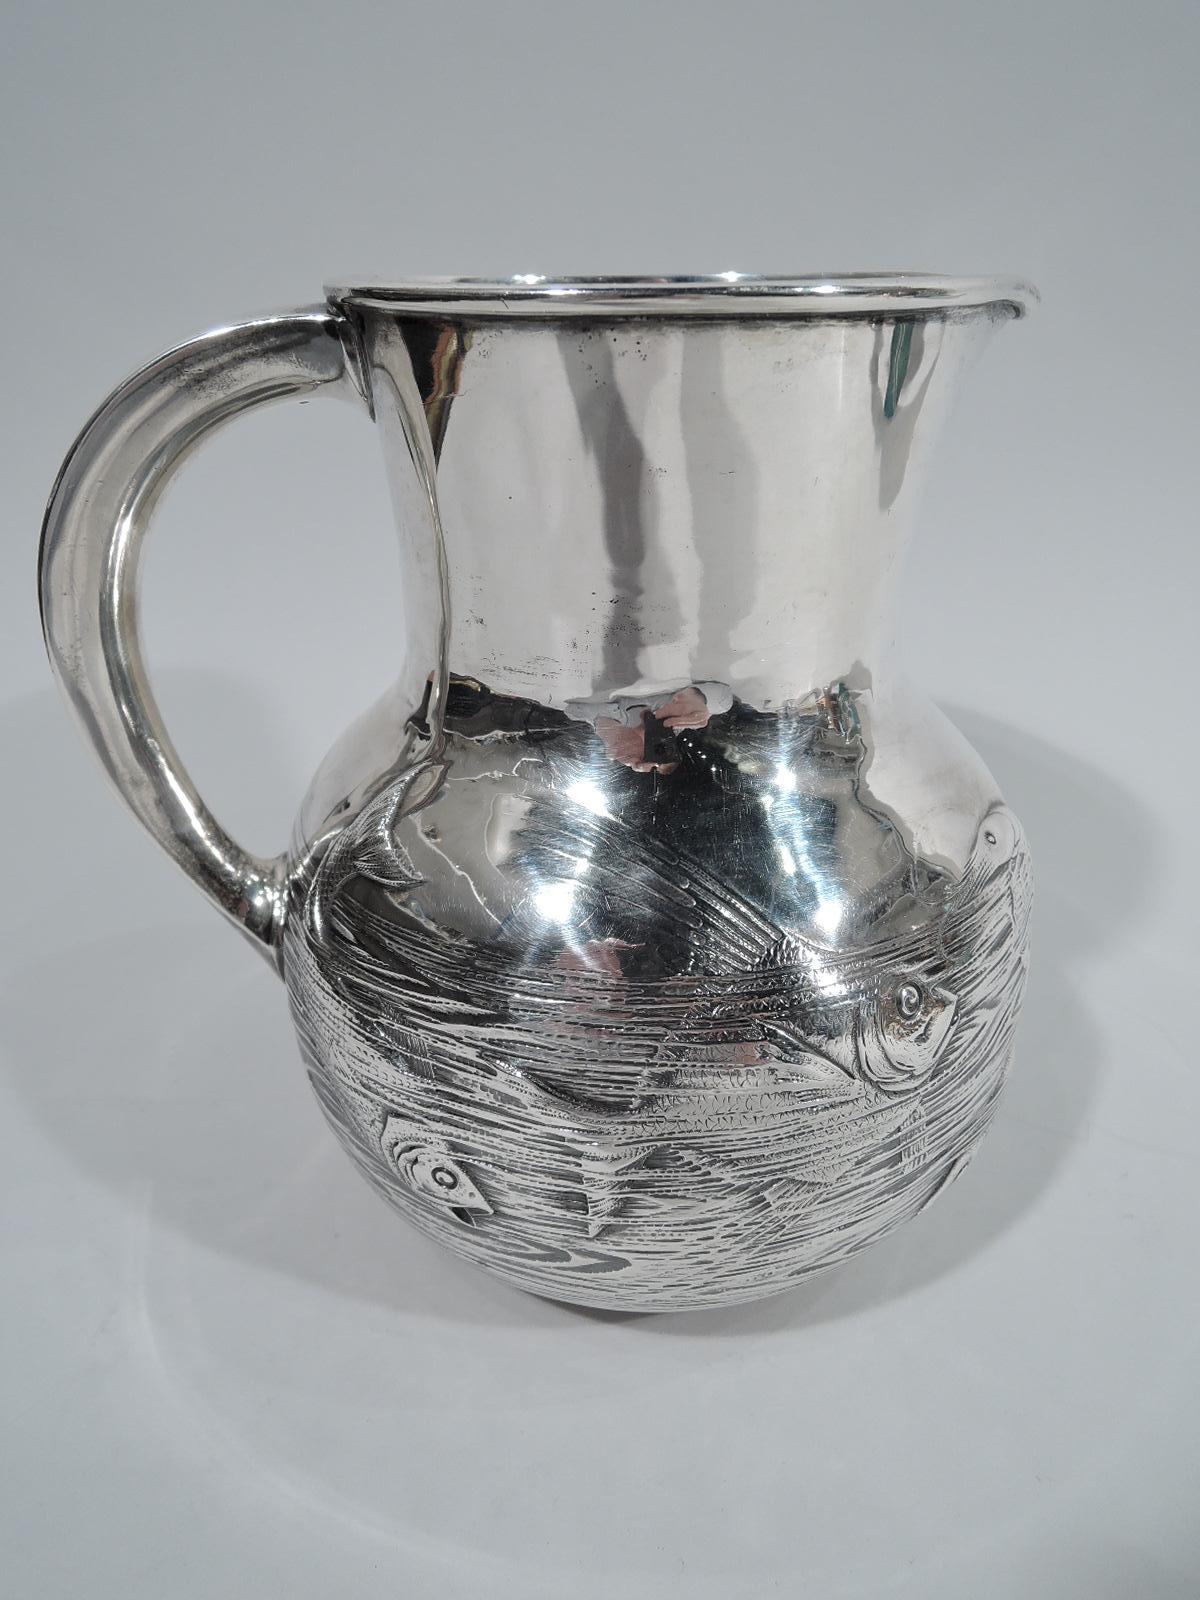 Japonesque sterling silver fishbowl water pitcher. Made by Gorham in Providence in 1883. Drum-form neck with small lip spout and c-scroll handle. Bowl has chased, tooled, and engraved frieze depicting fish gliding and diving and coming up for air.